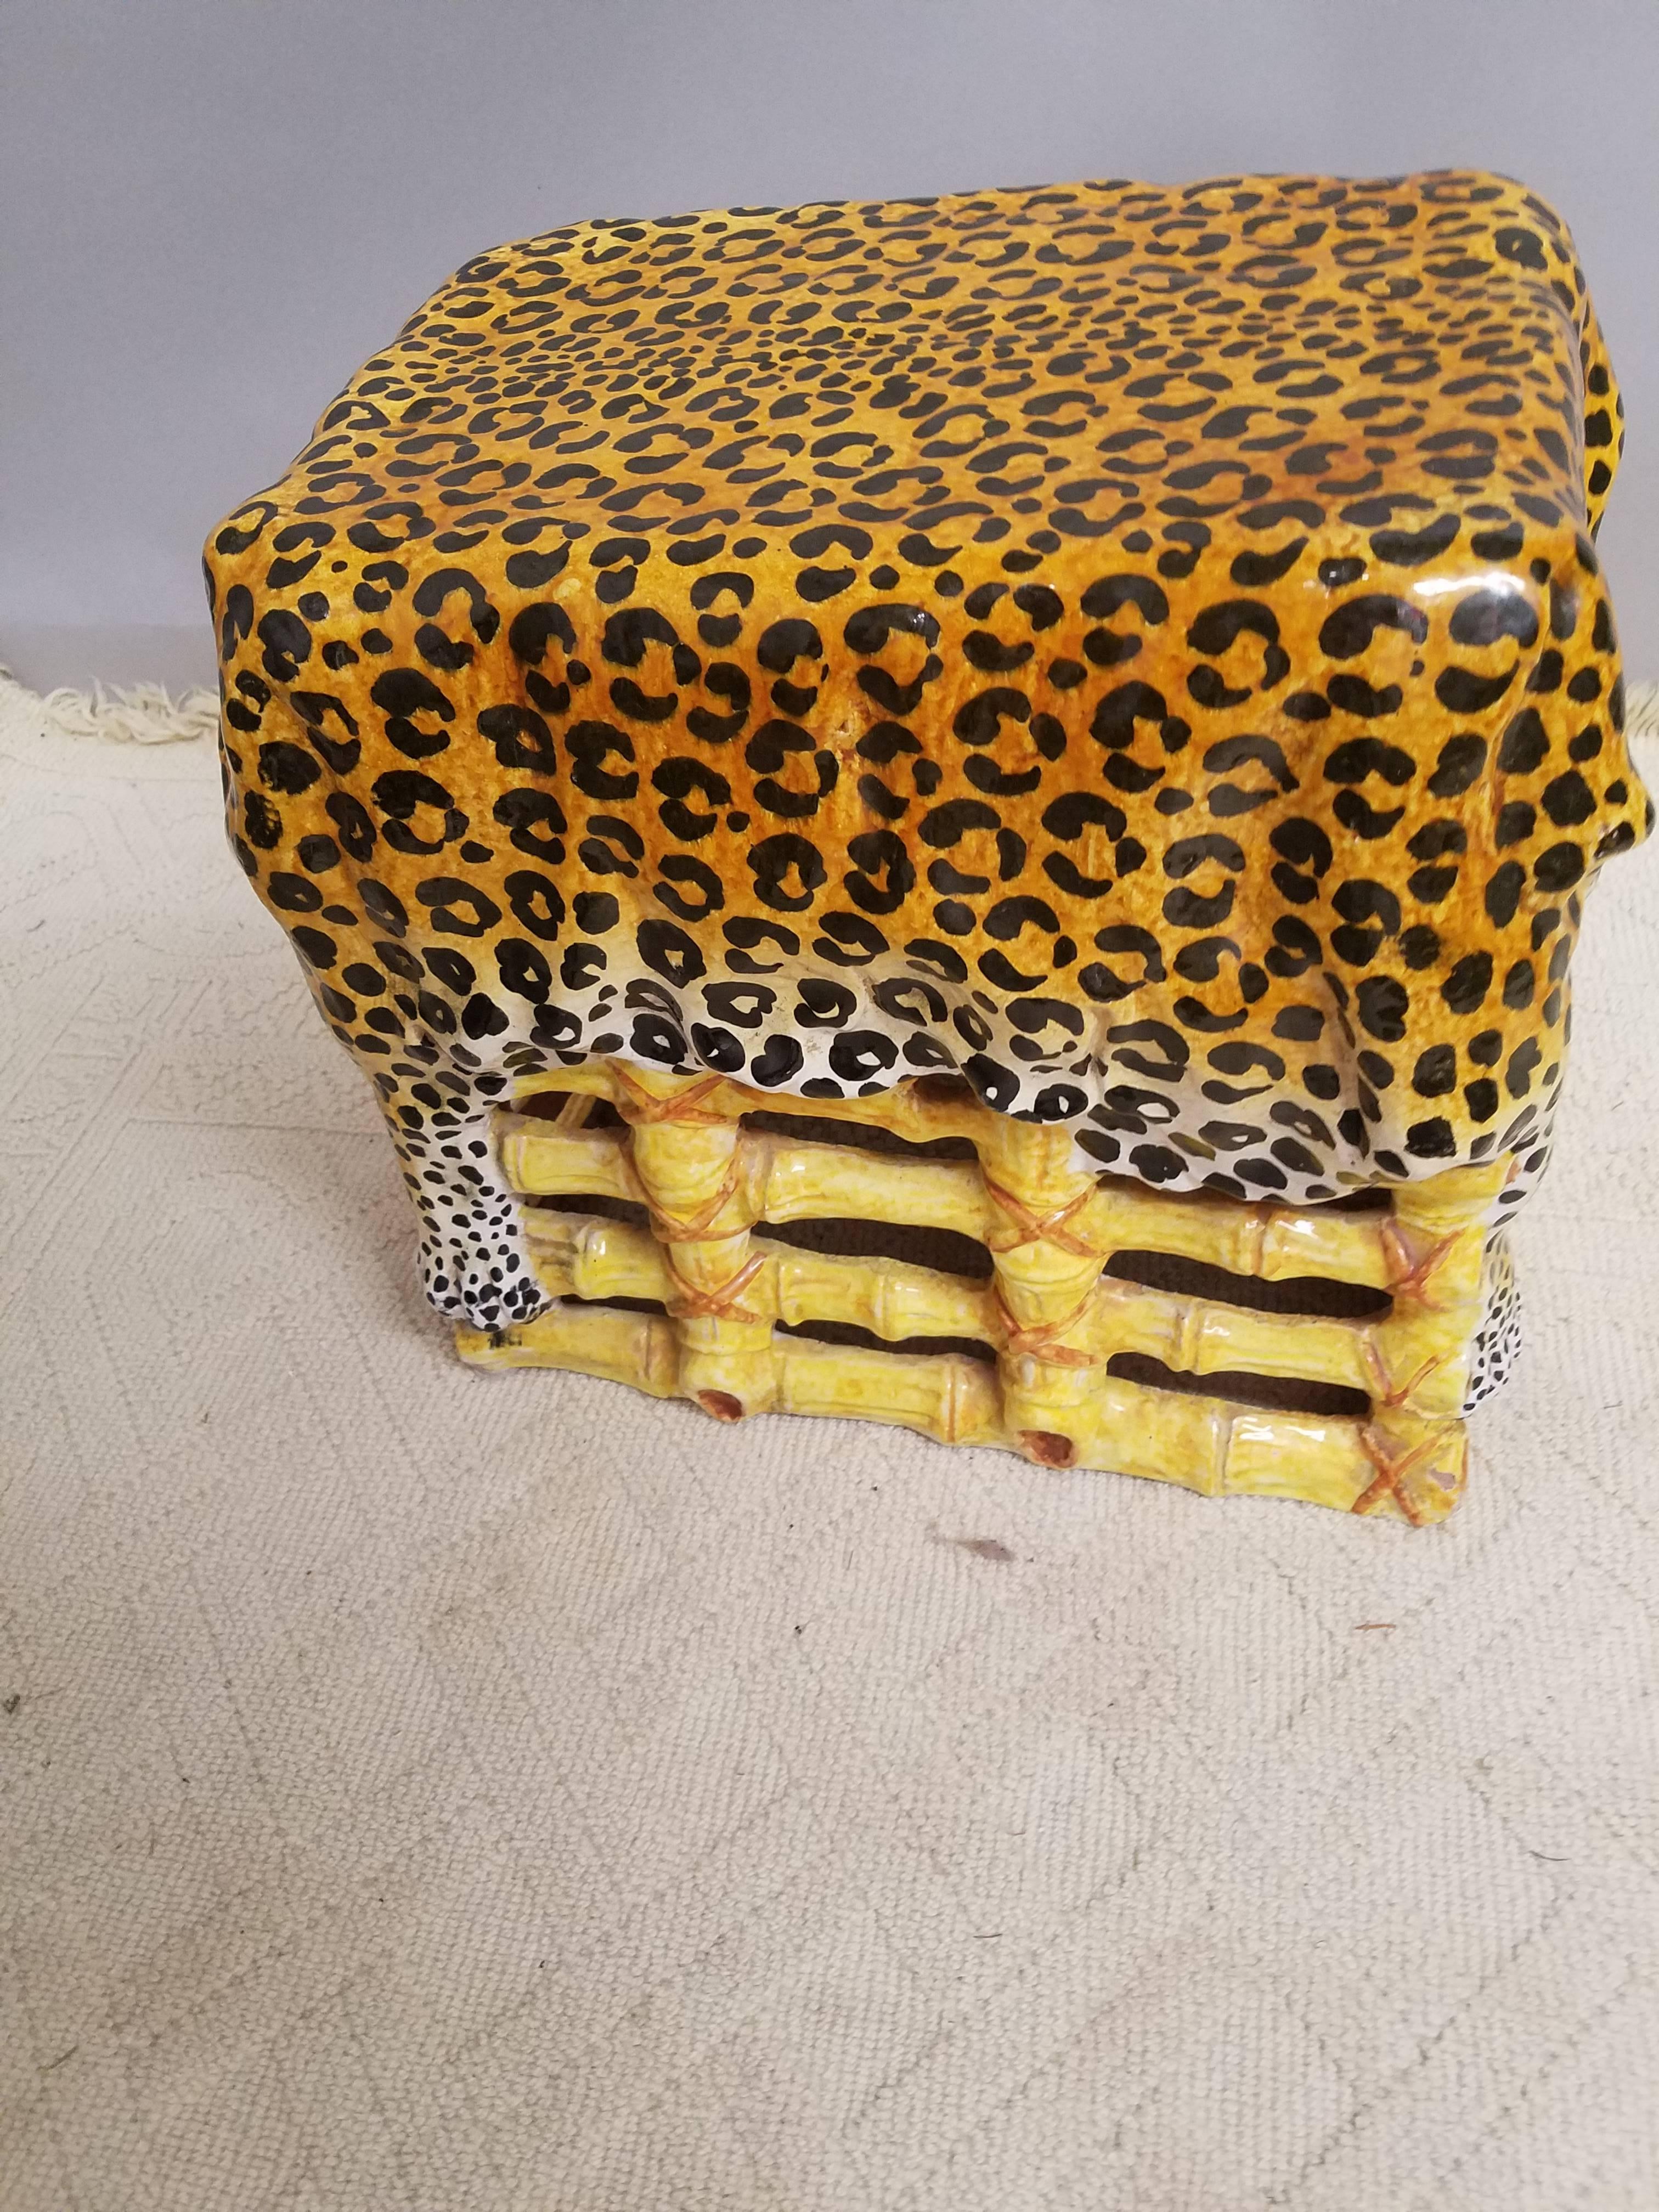 This Hollywood regency leopard and bamboo motif garden seat would be a perfect martini or book table. The whimsical style of a leopard pelt draped over a faux bamboo frame is high style and unique.